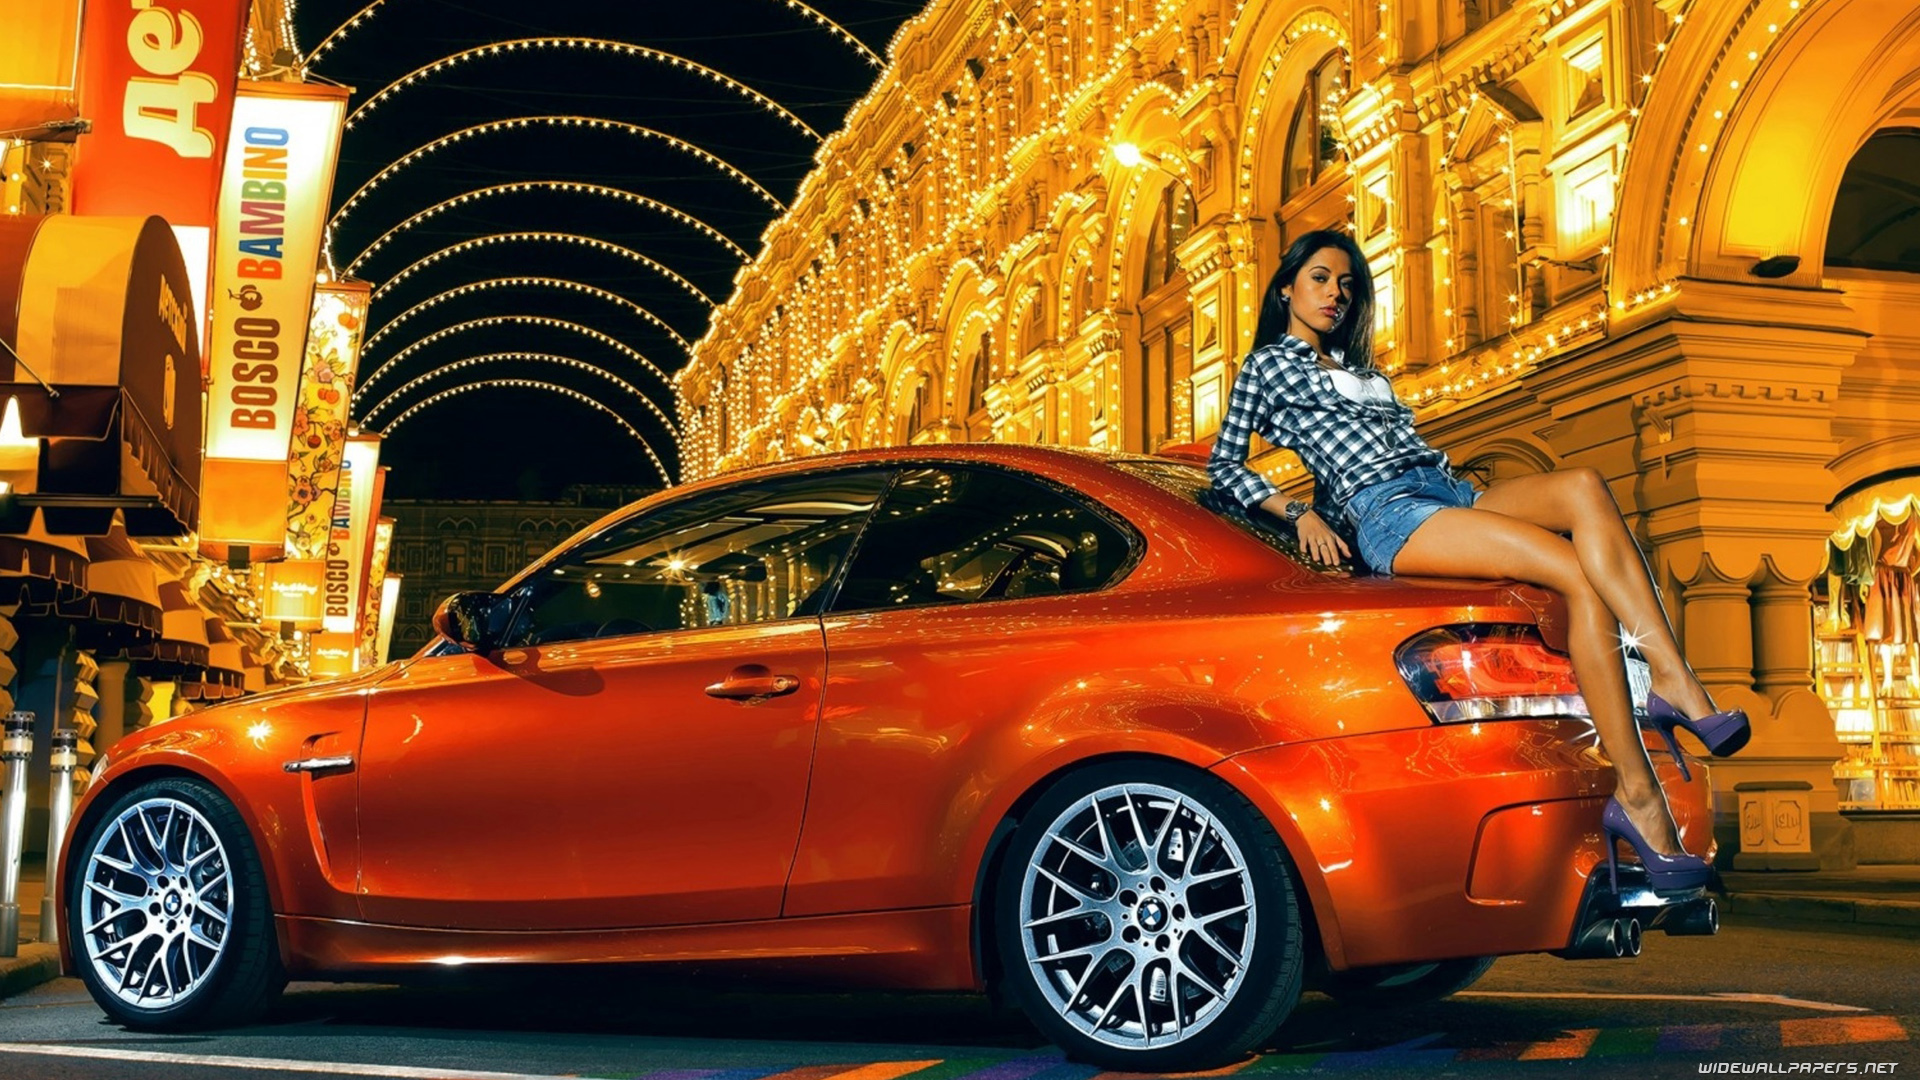 BMW and Girls desktop wallpapers HD and wide wallpapers